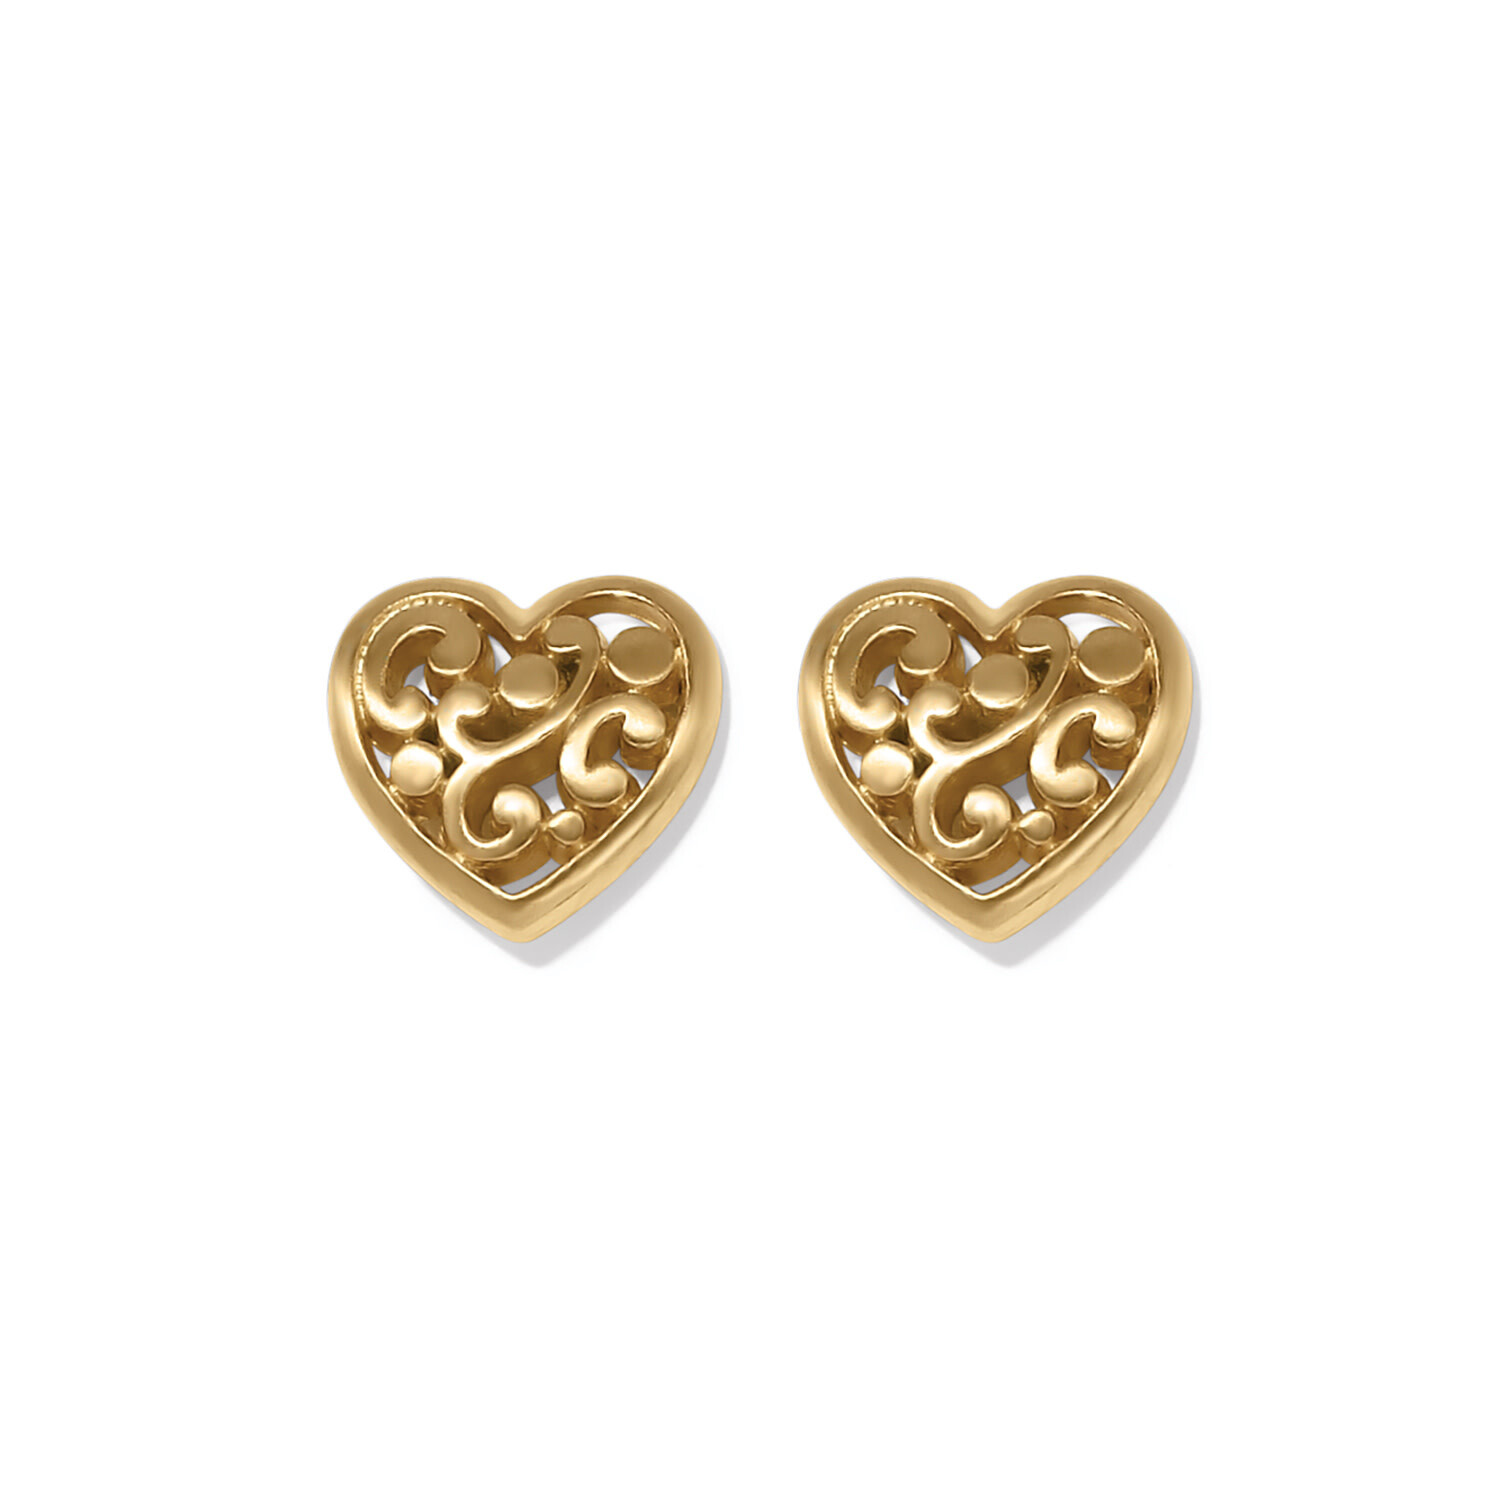 BRIGHTON Contempo Heart Post Earrings - Amber Marie and Company